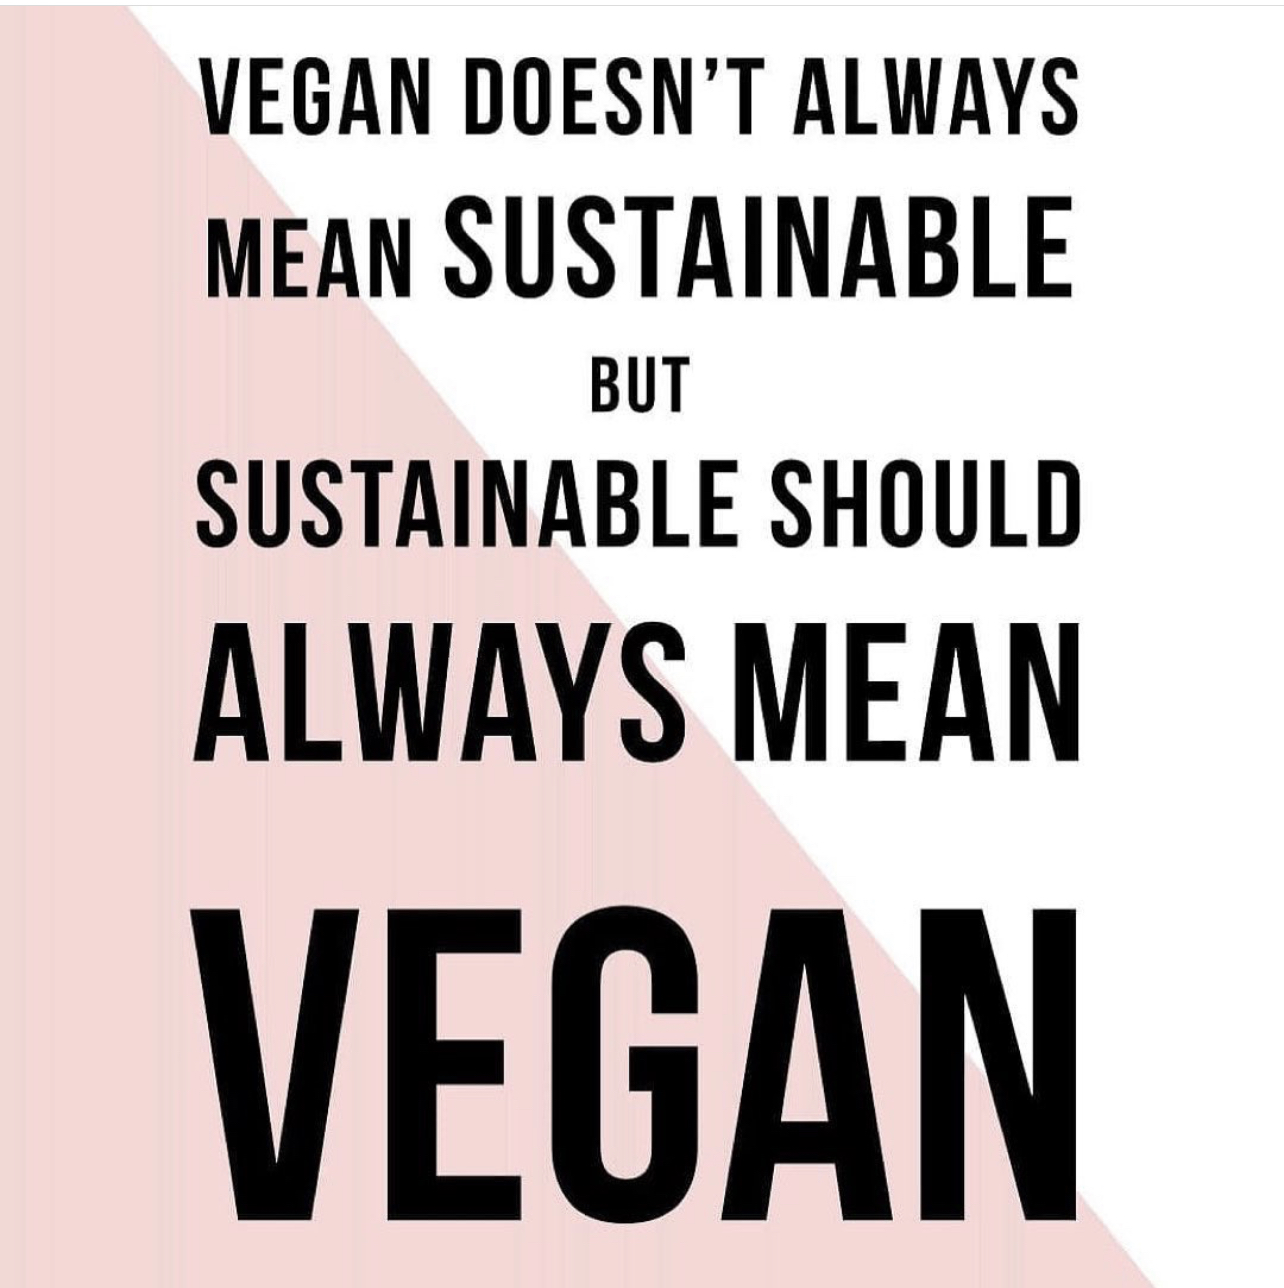 Vegan Doesn’t Mean Sustainable but Sustainable Should Always Mean Vegan